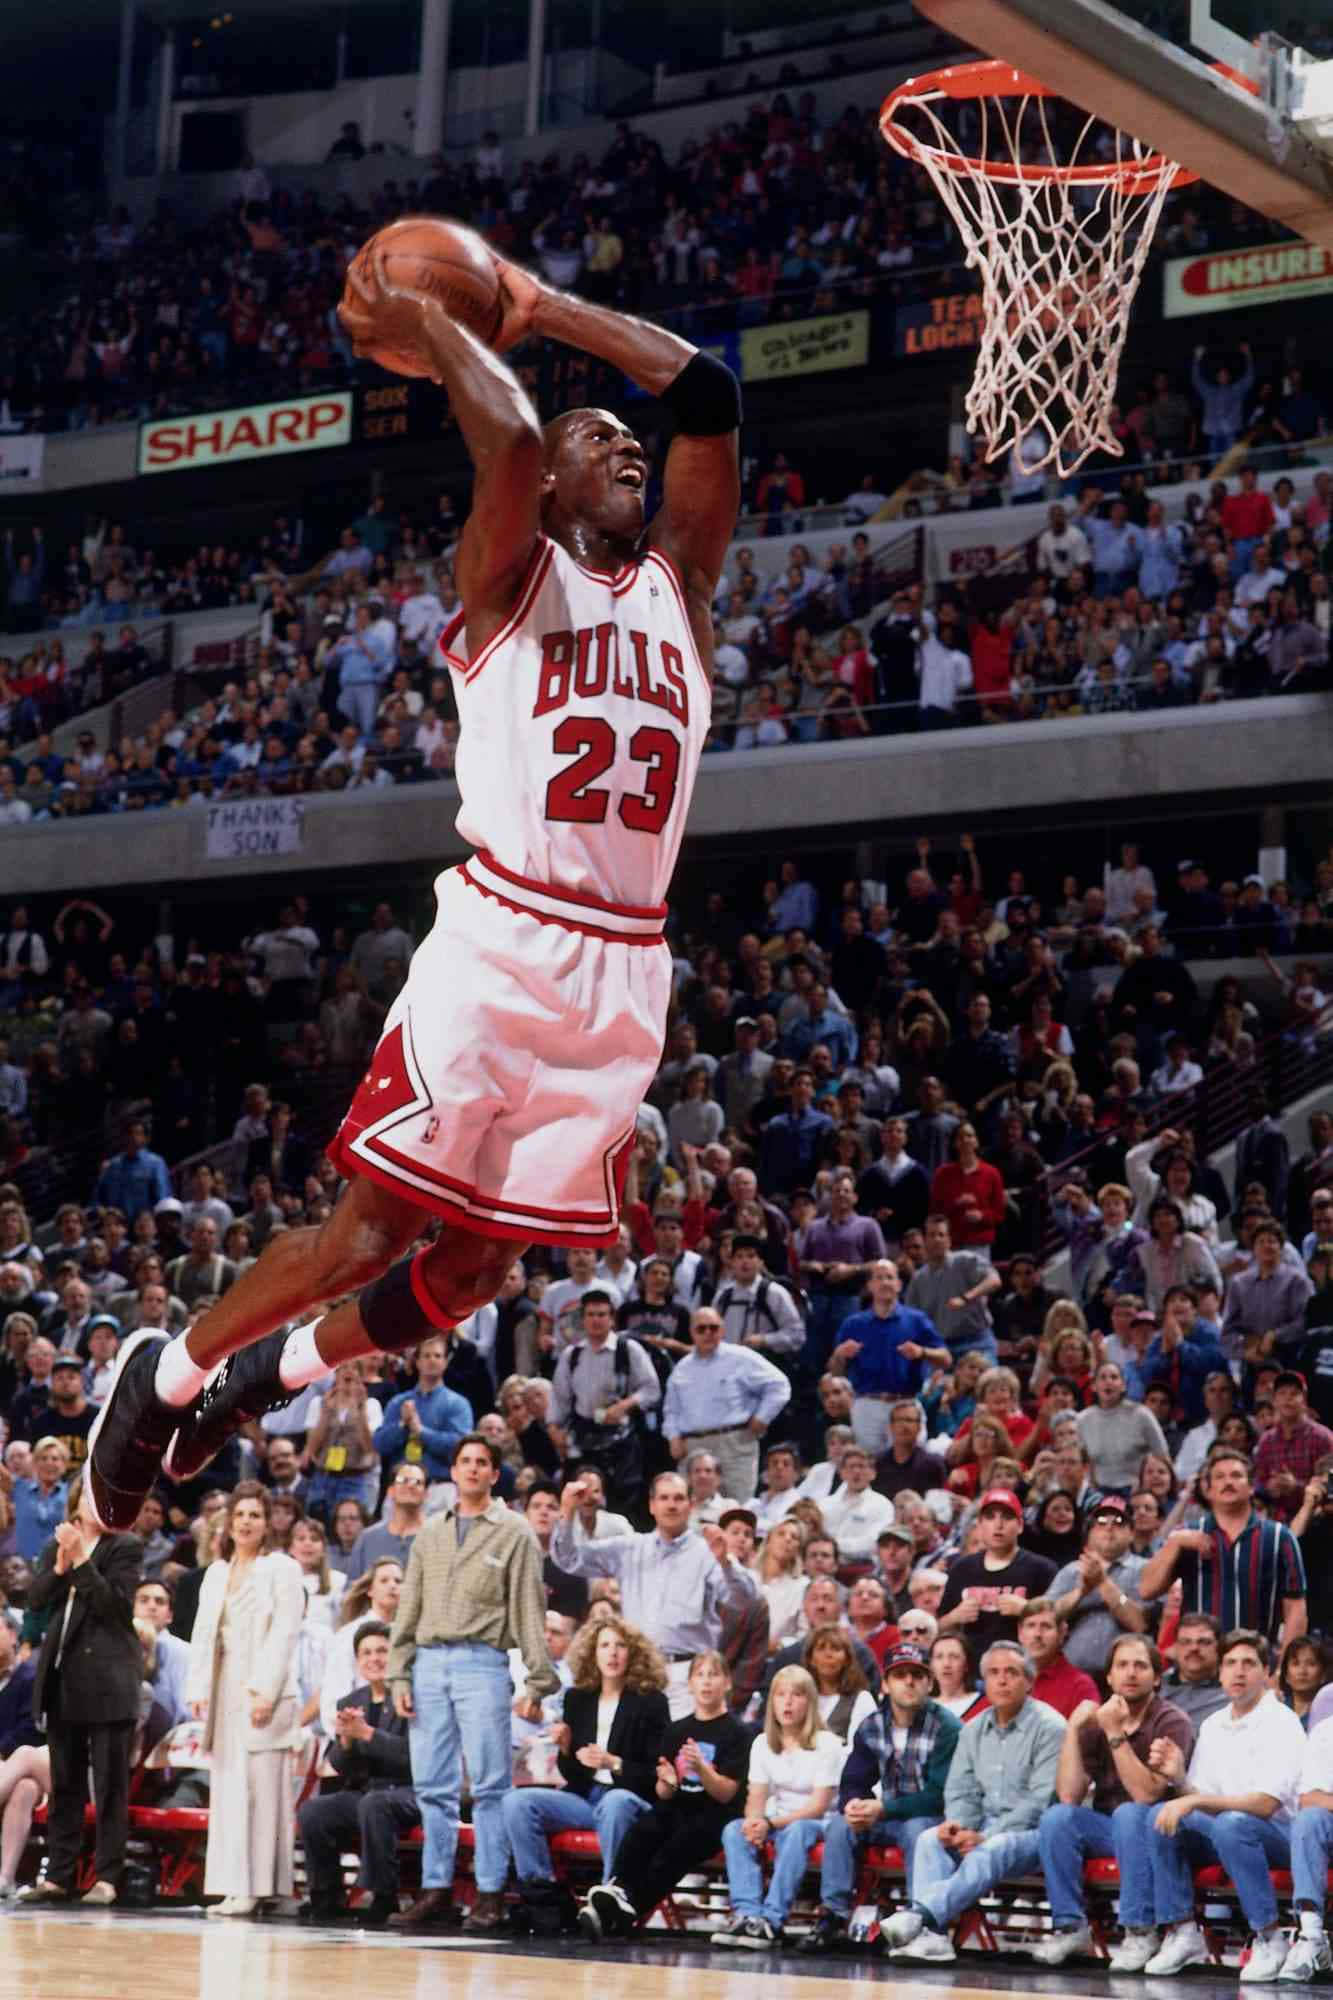 Action-packed shot of Michael Jordan mid-air during a basketball game